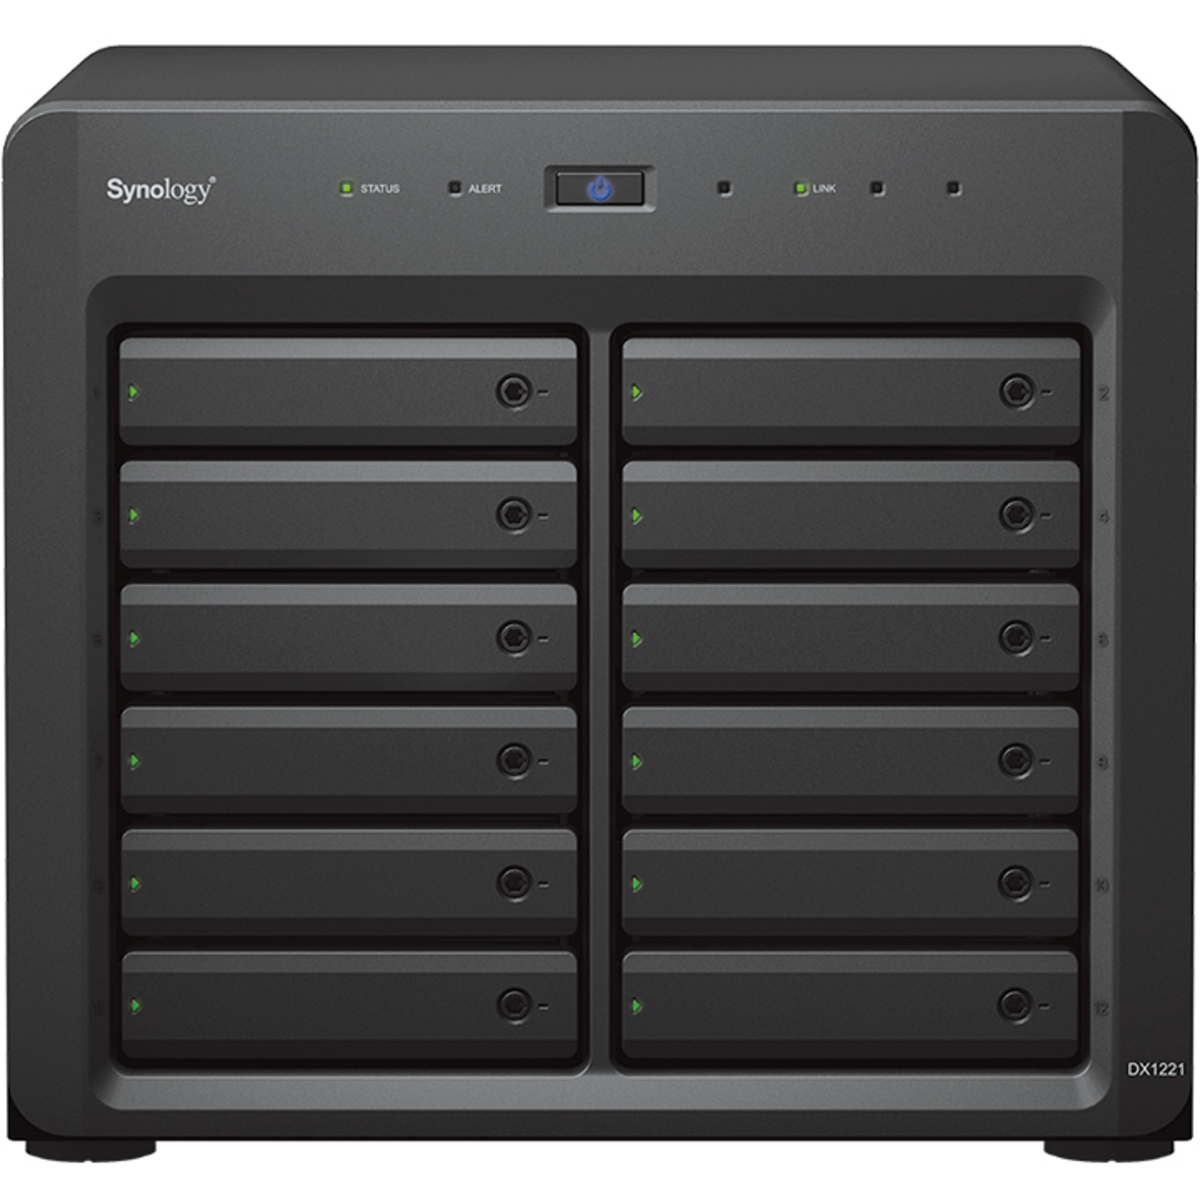 Synology DX1222 External Expansion Drive 98tb 12-Bay Desktop Multimedia / Power User / Business Expansion Enclosure 7x14tb Western Digital Red Pro WD142KFGX 3.5 7200rpm SATA 6Gb/s HDD NAS Class Drives Installed - Burn-In Tested DX1222 External Expansion Drive